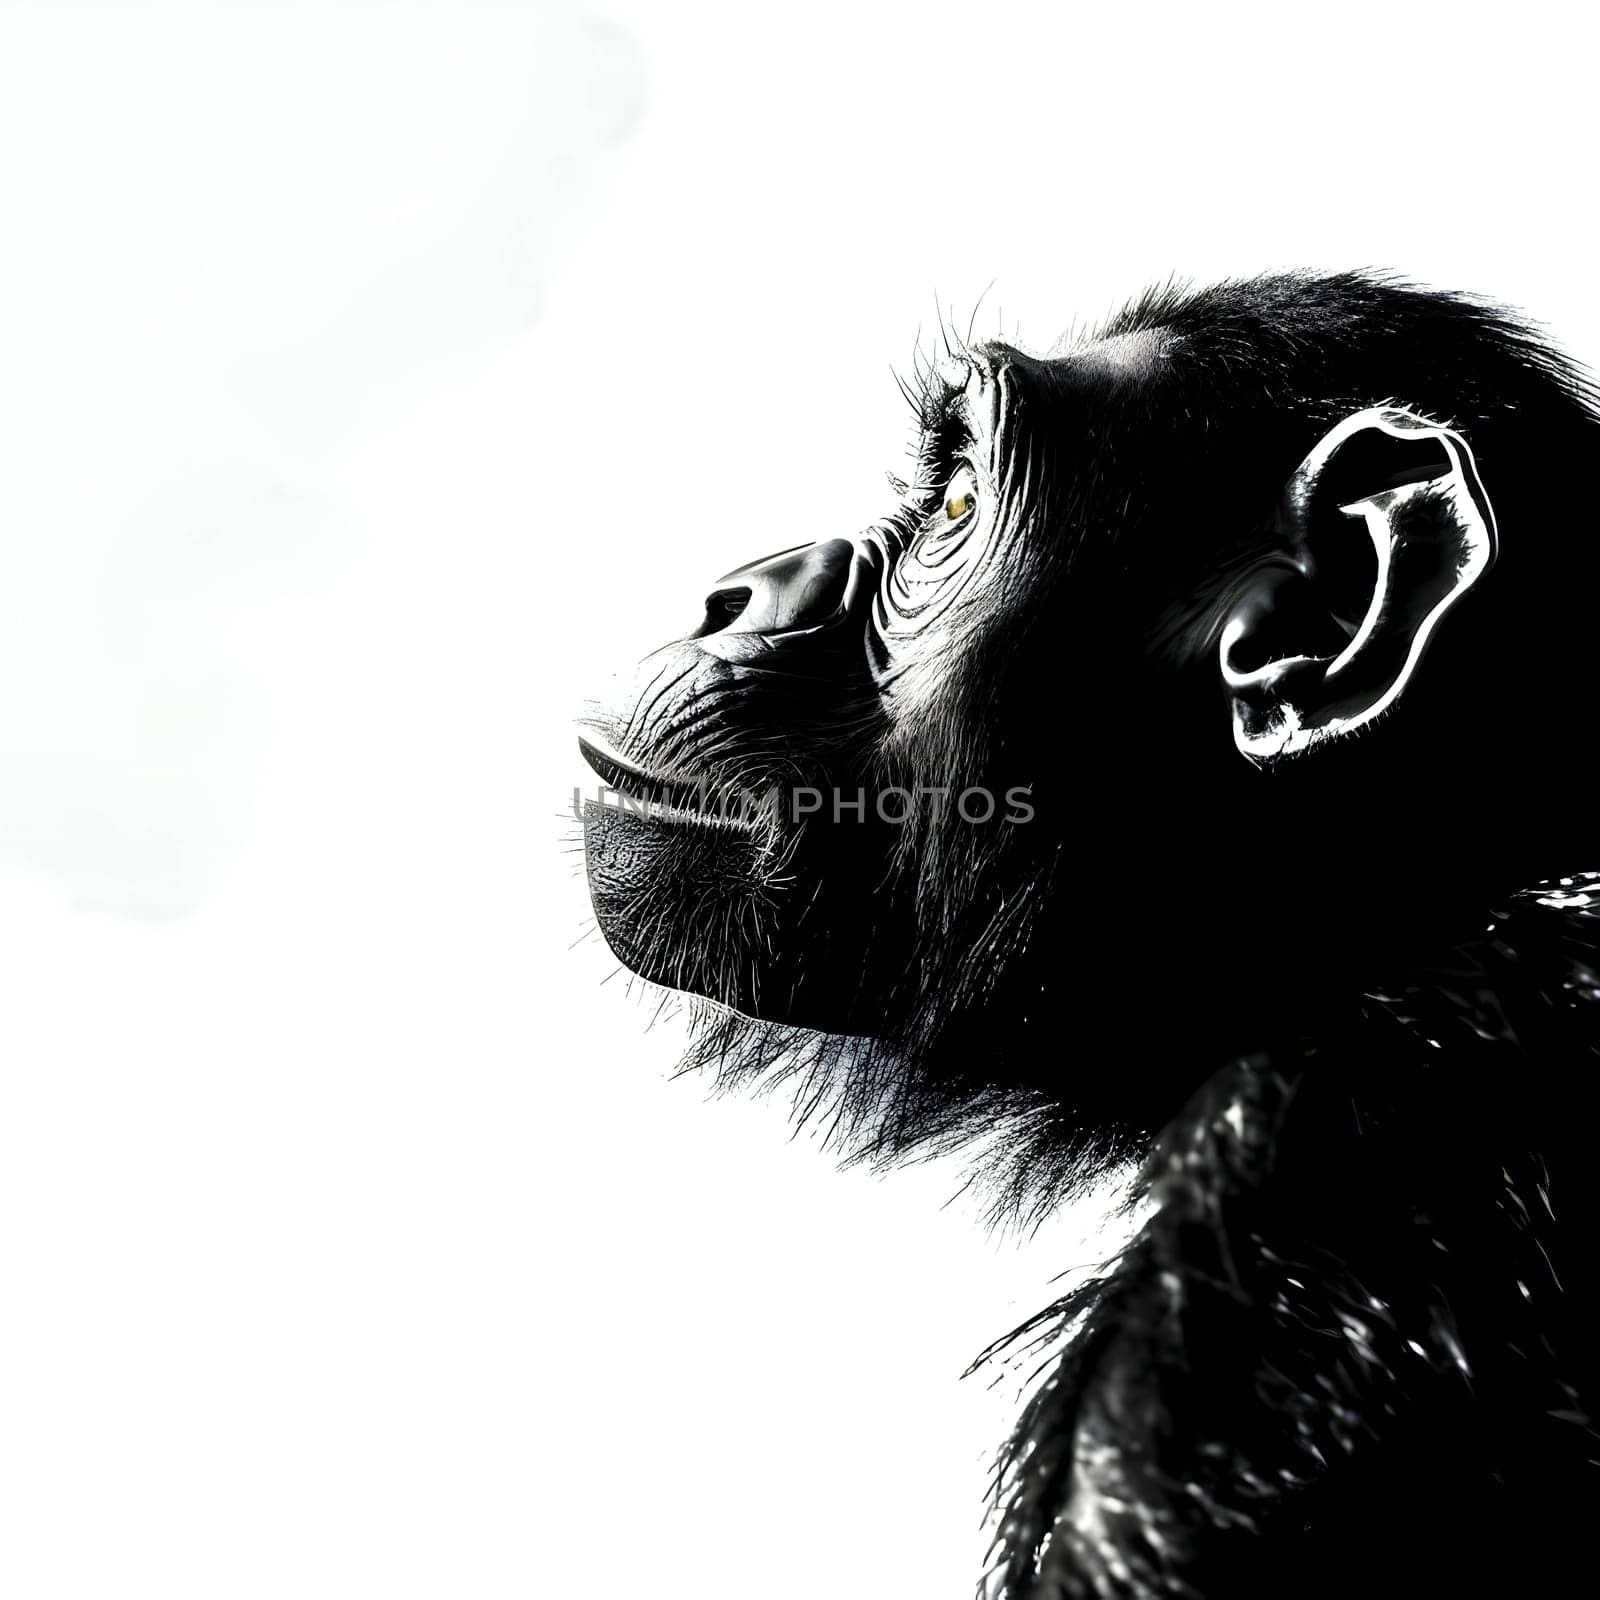 Vector illustration of a chimpanzee in black silhouette against a clean white background, capturing graceful forms.